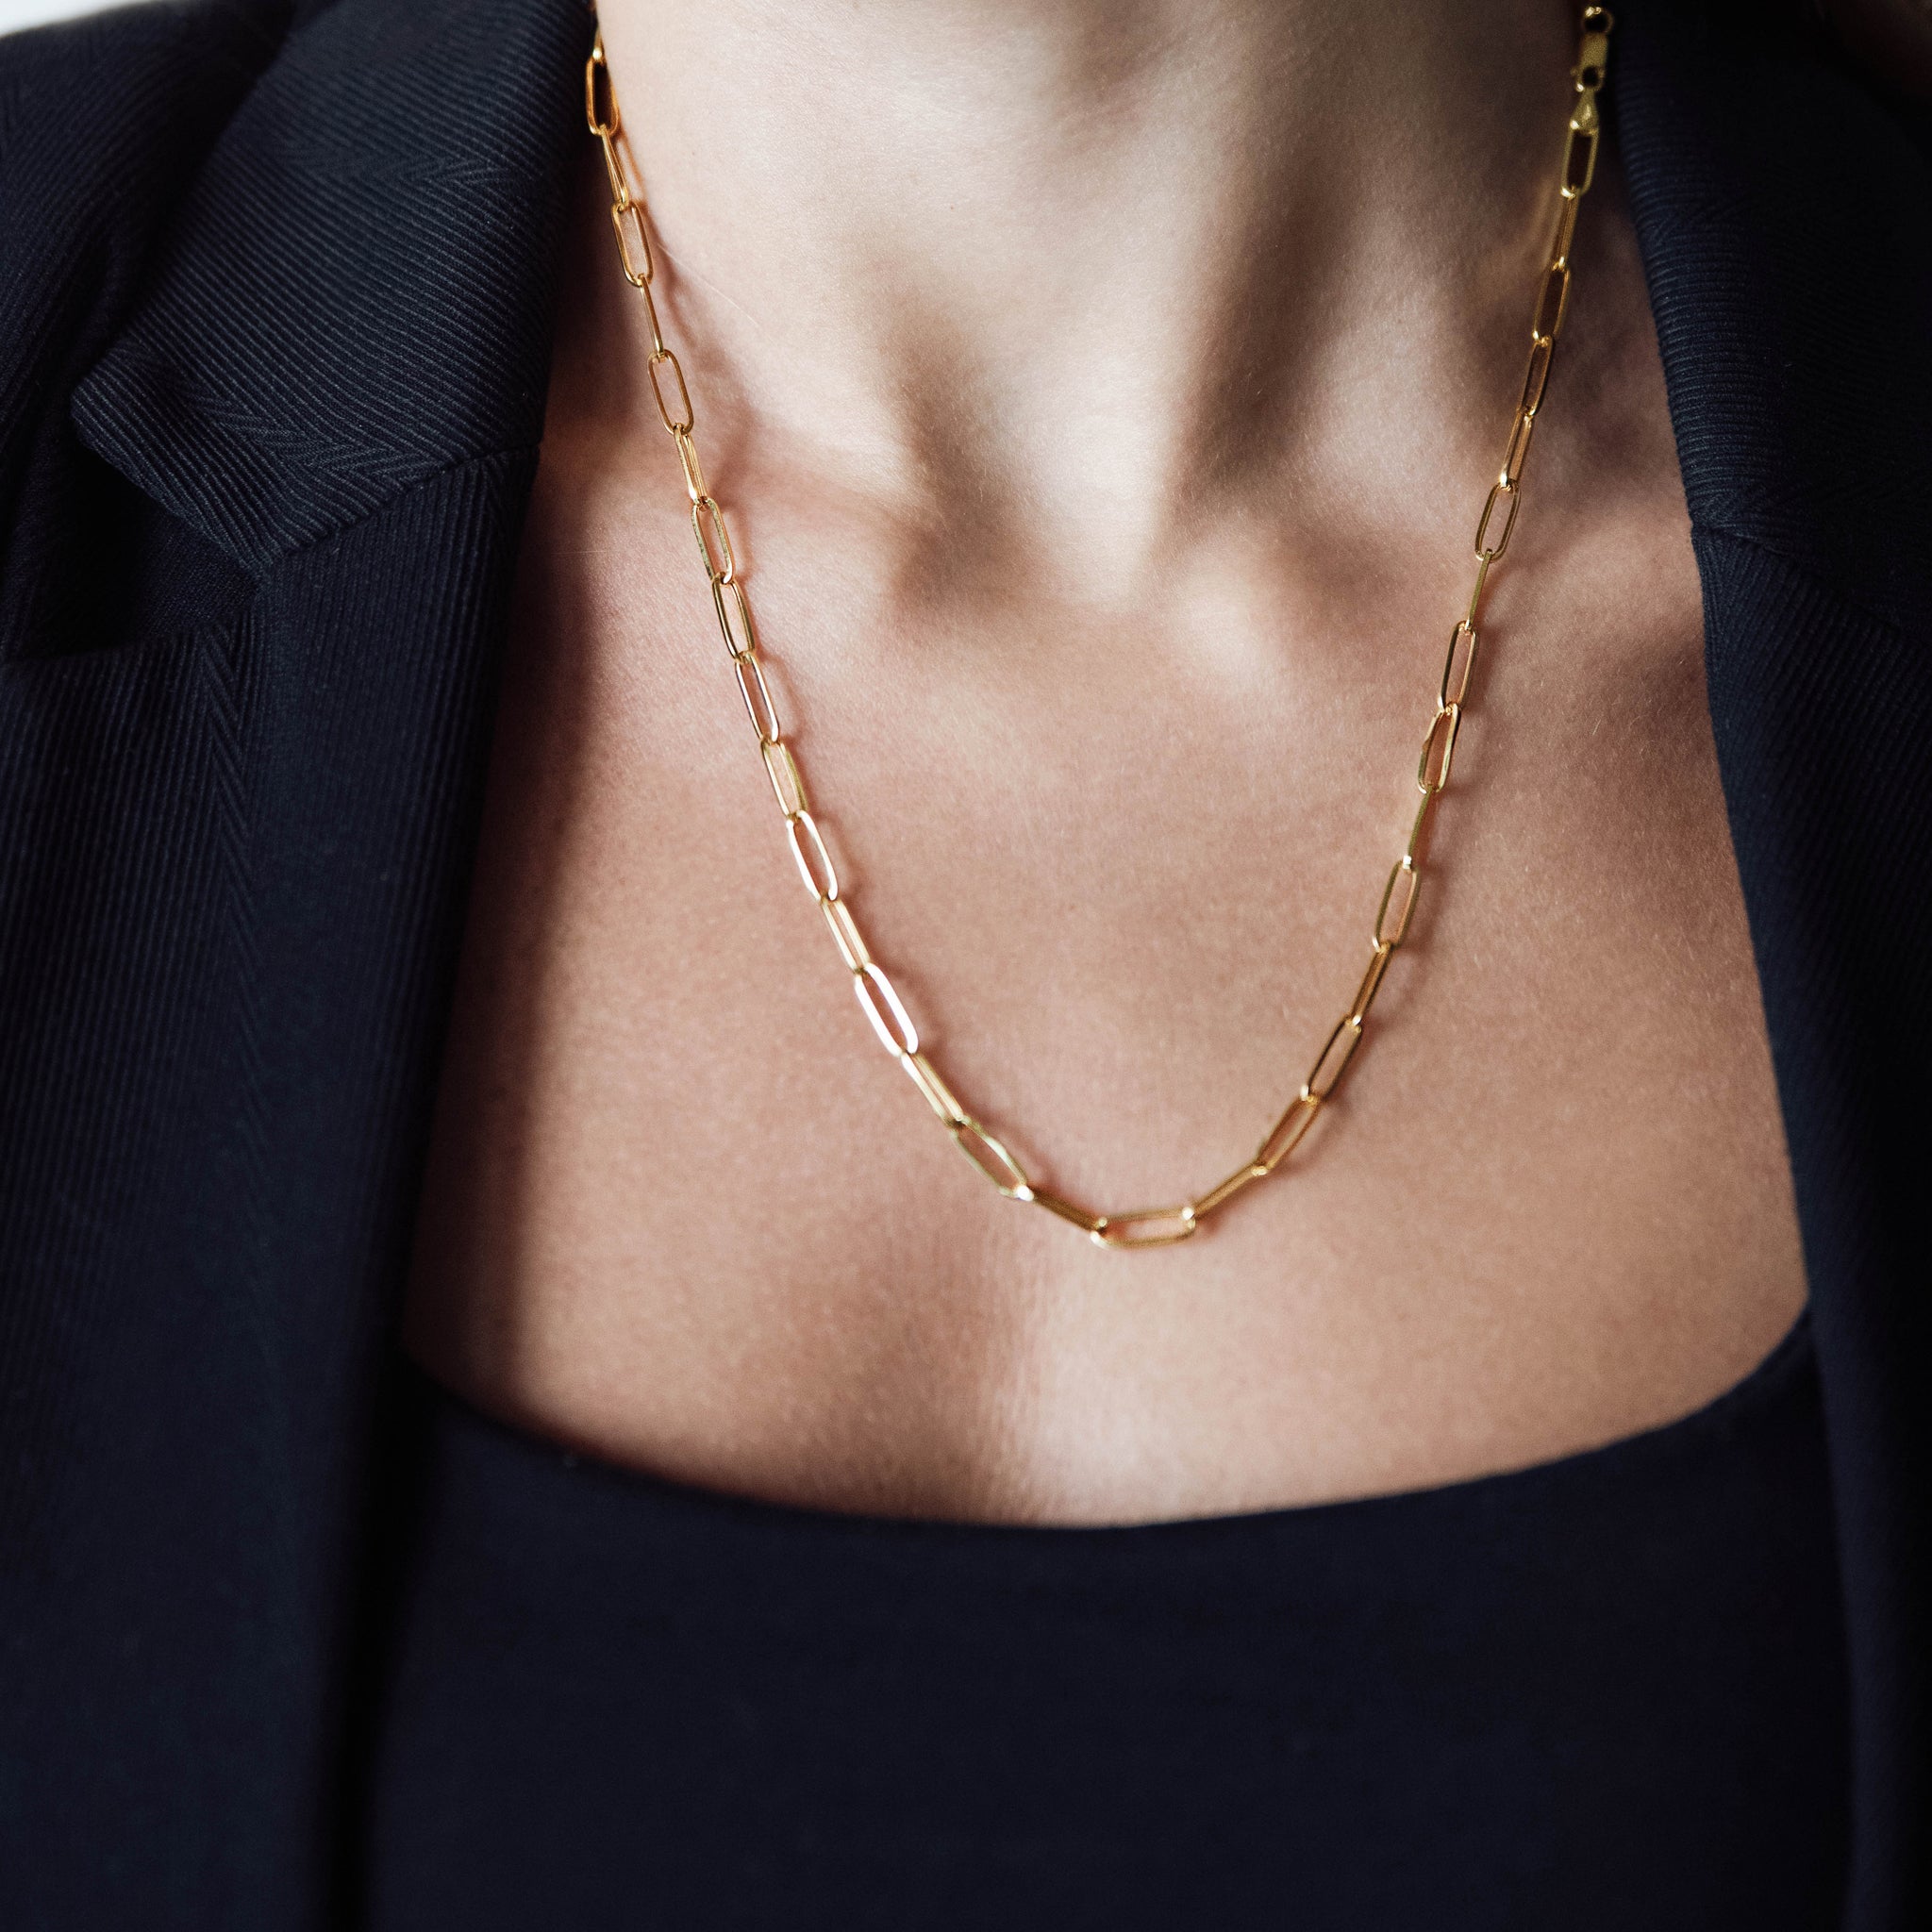 Papel Chain Necklace